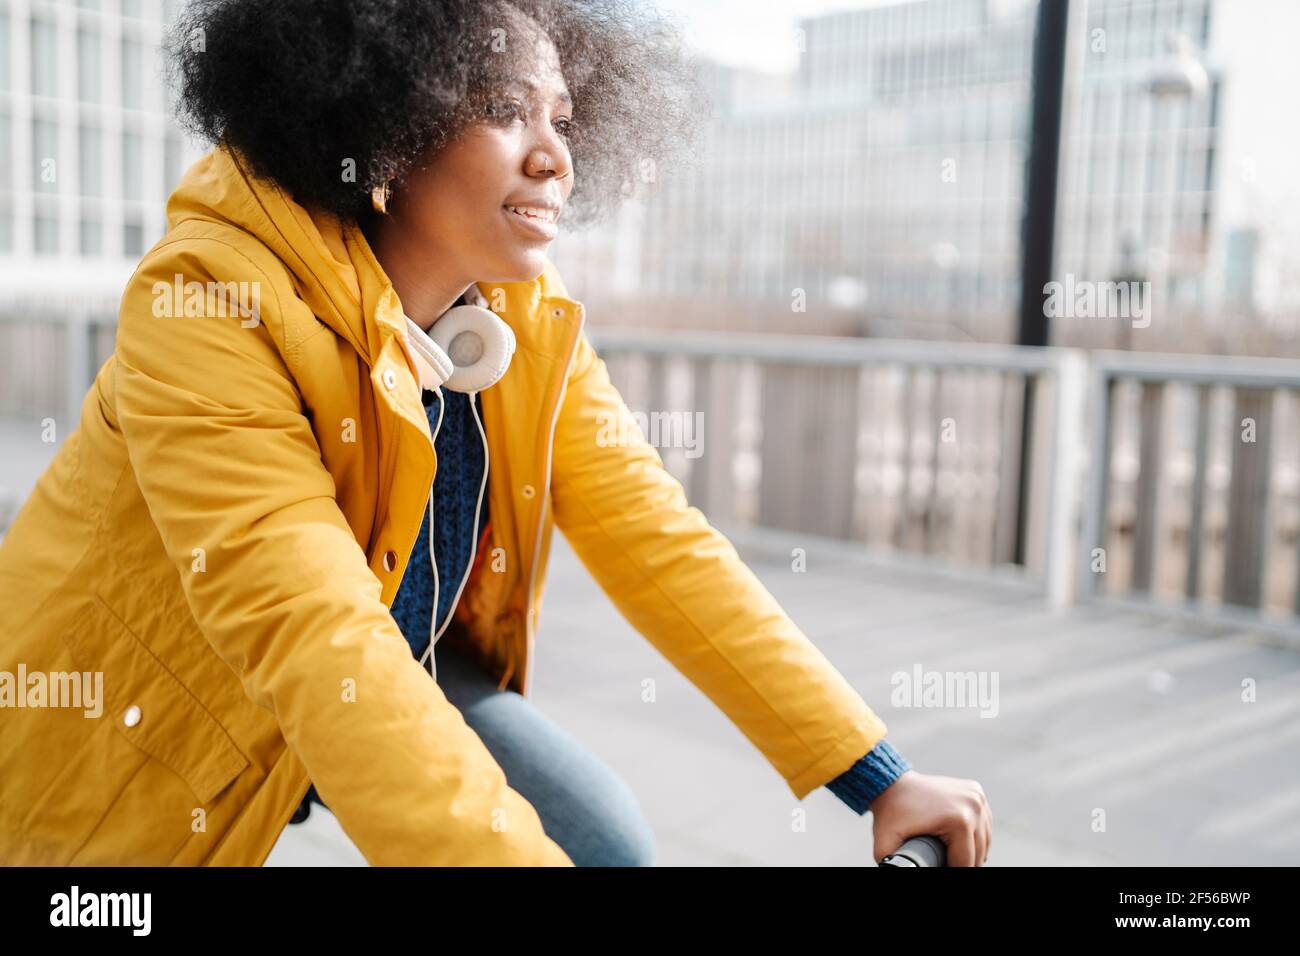 Young woman cycling on footpath Stock Photo